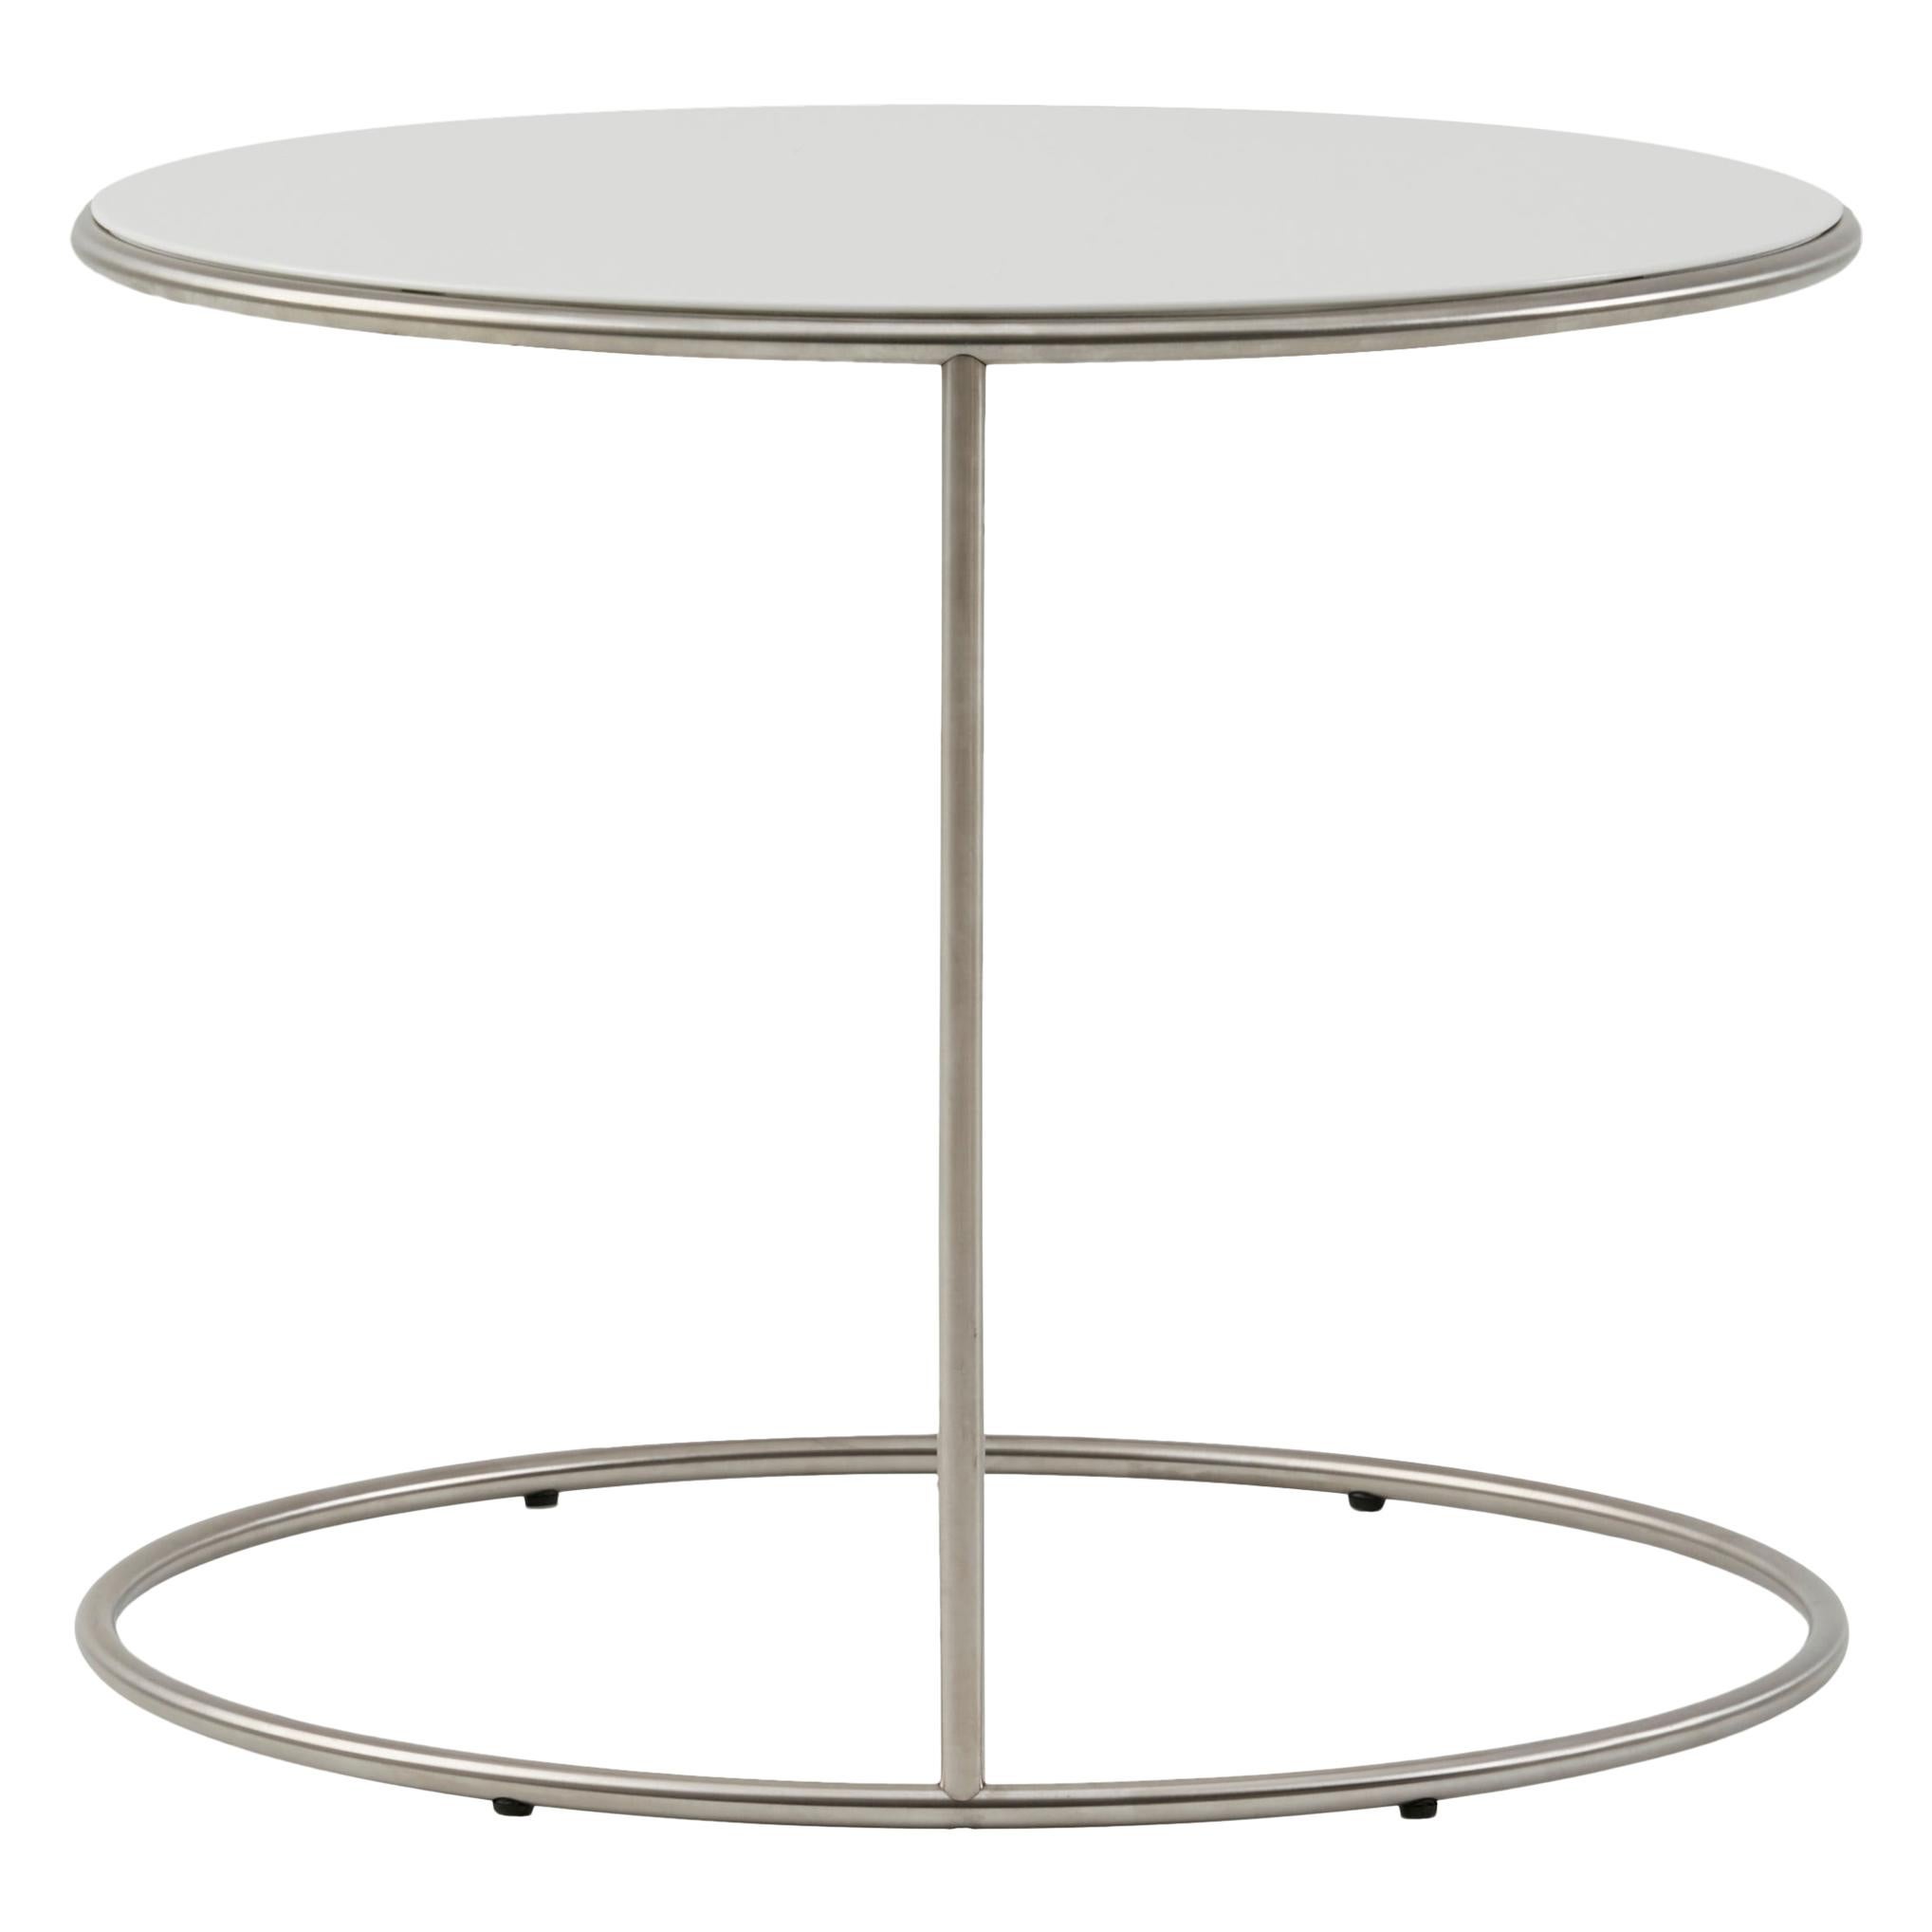 For Sale: White (01_White) Catalano and Marelli Cannot Table Lacquered Matte or Glossy Finish, Cappellini